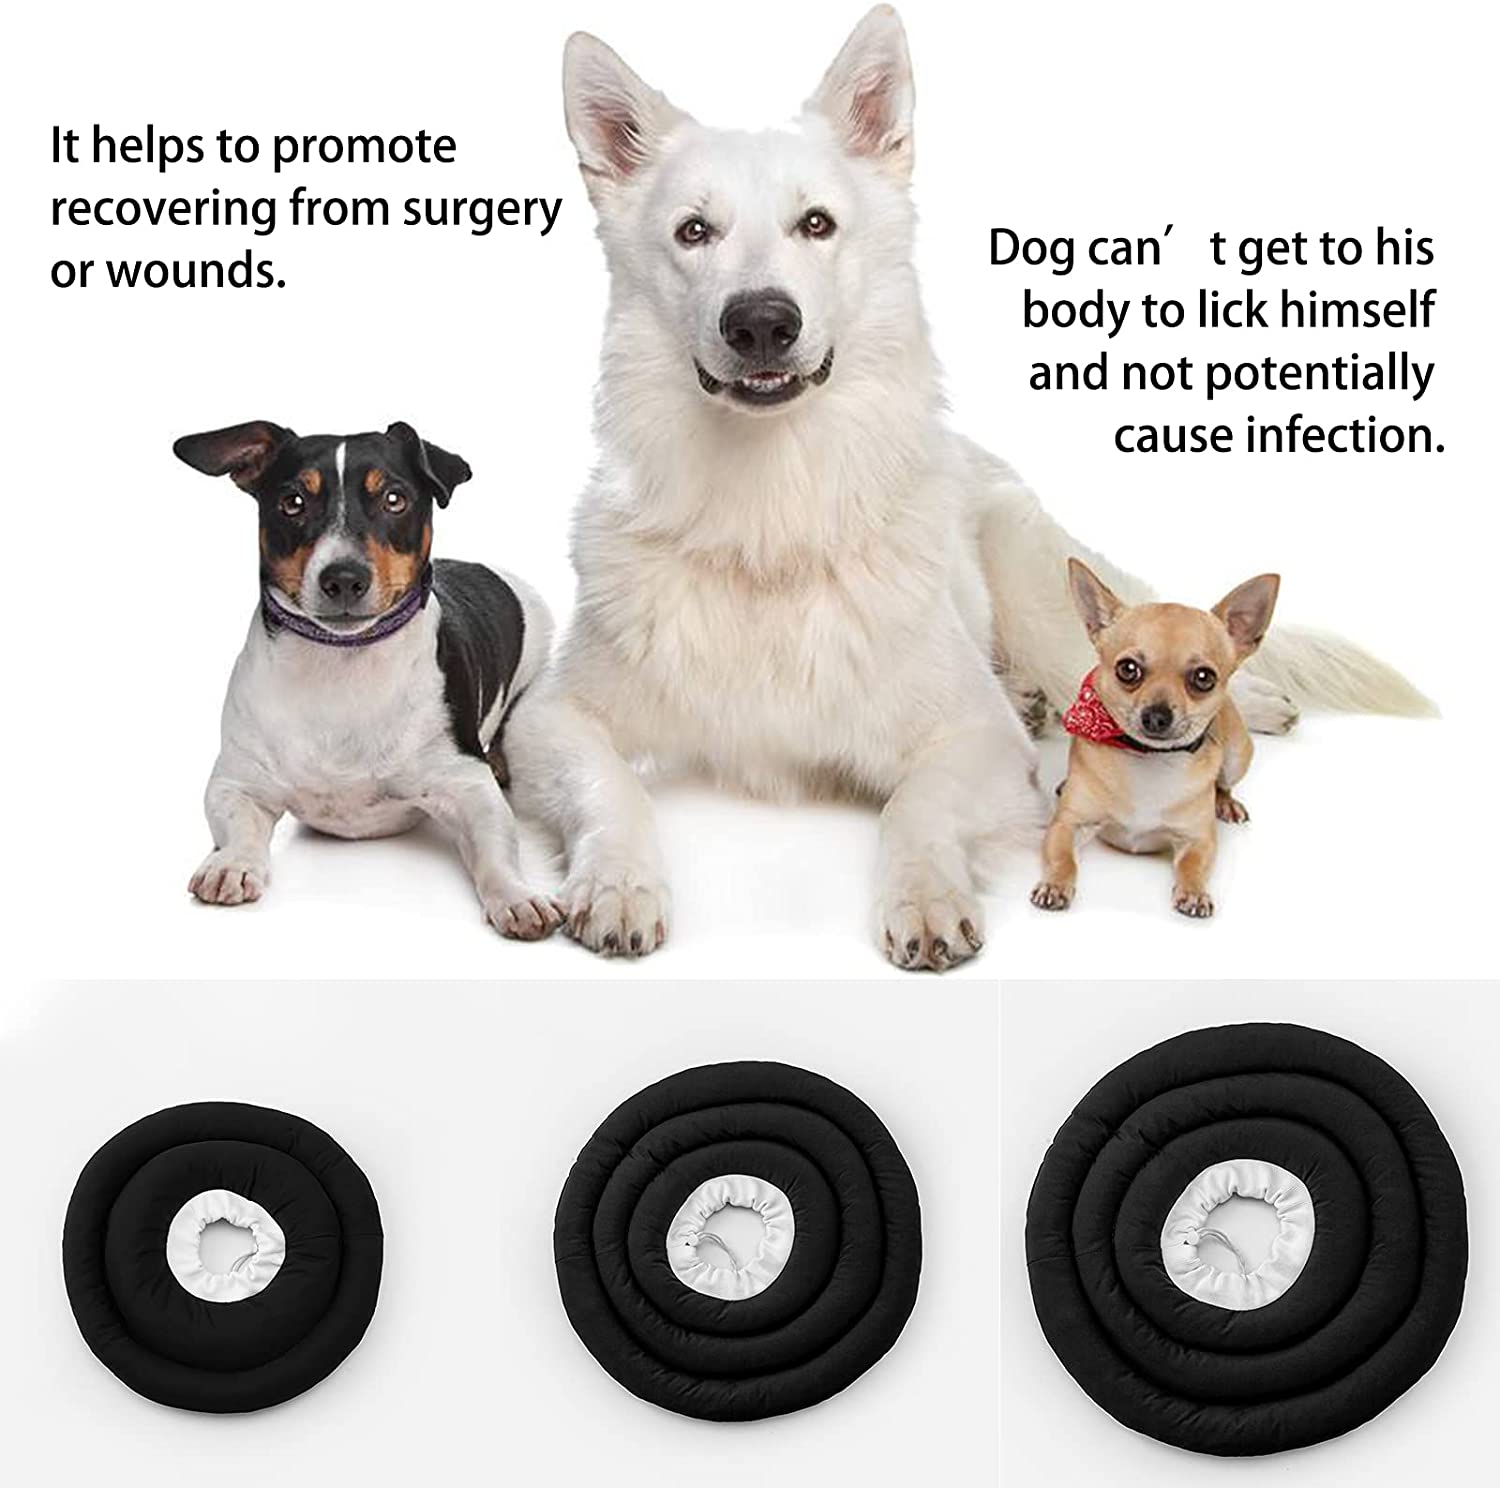 Protective-Cone-for-Dogs-Cats-After-Surgery-Soft-Elizabethan-Collar-Recovery-Puppy-Pet-Supplies-1958015-7